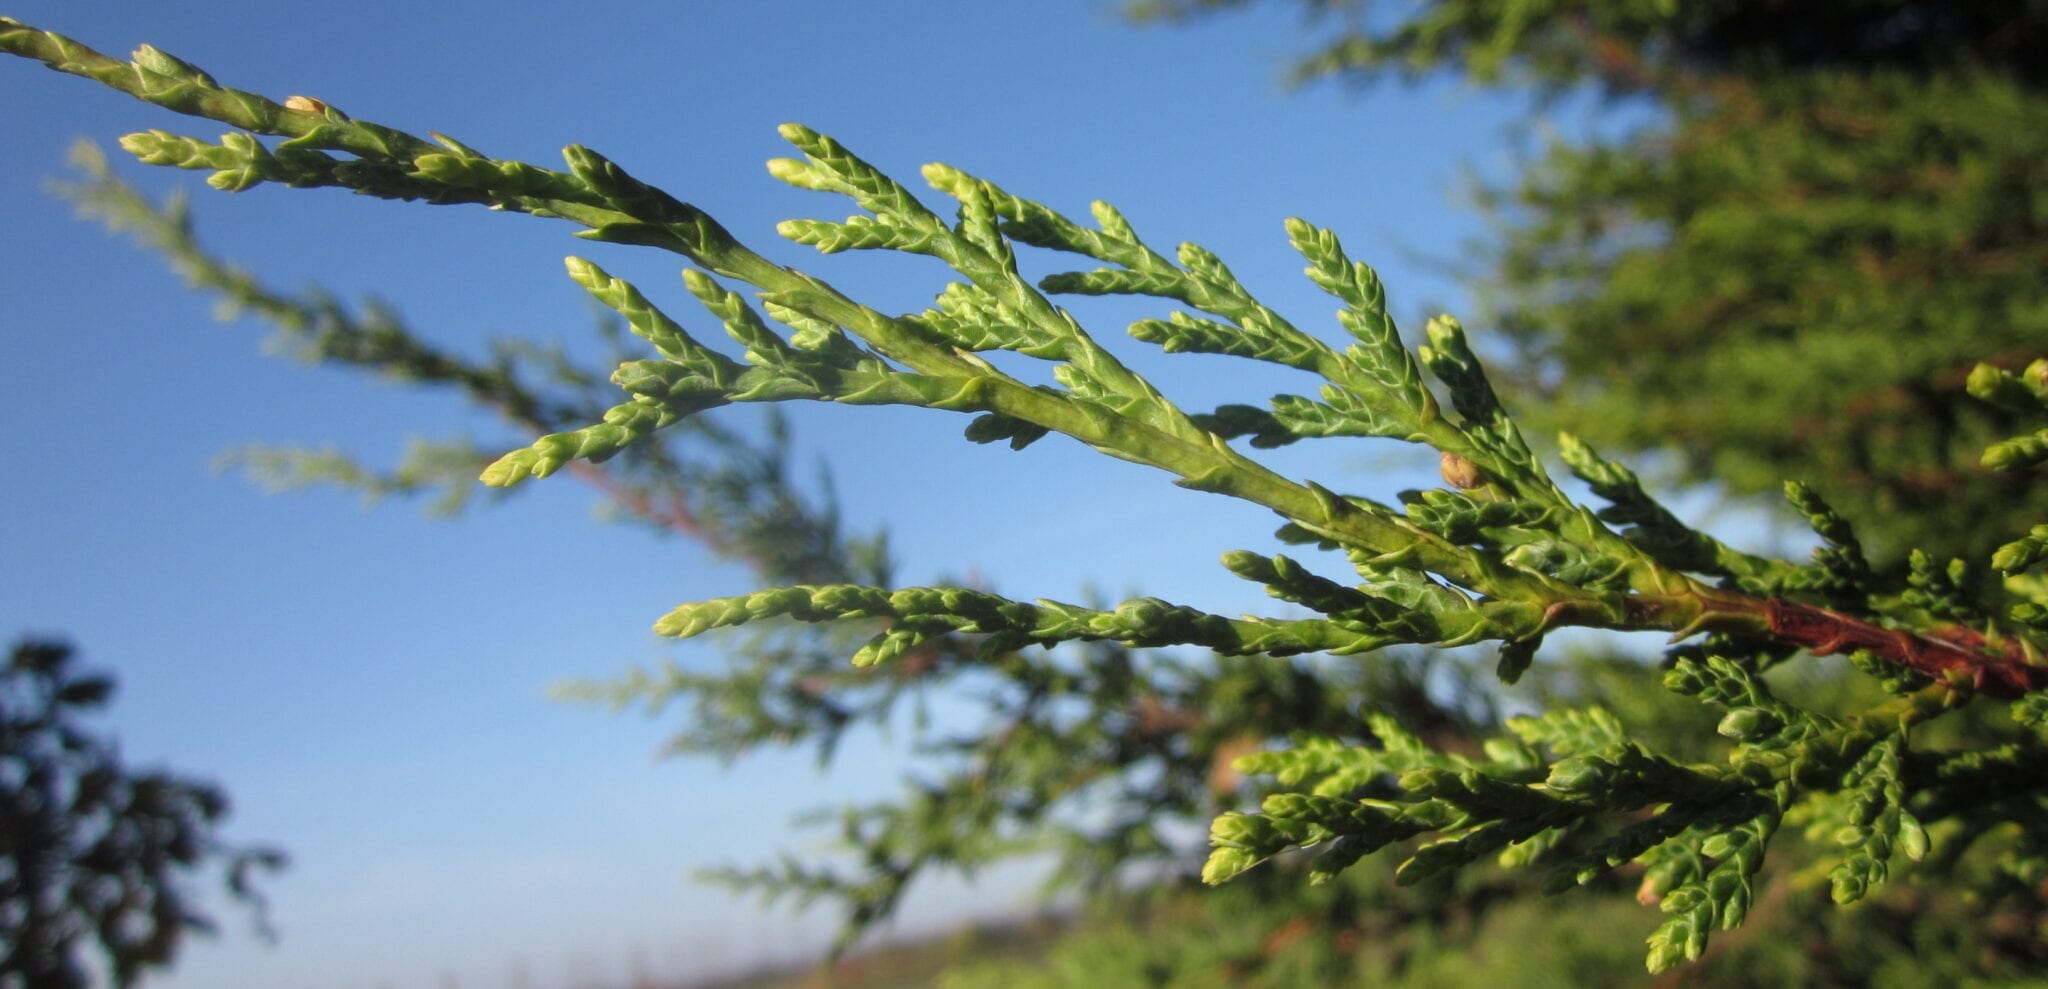 Leyland Cypress scale leaves